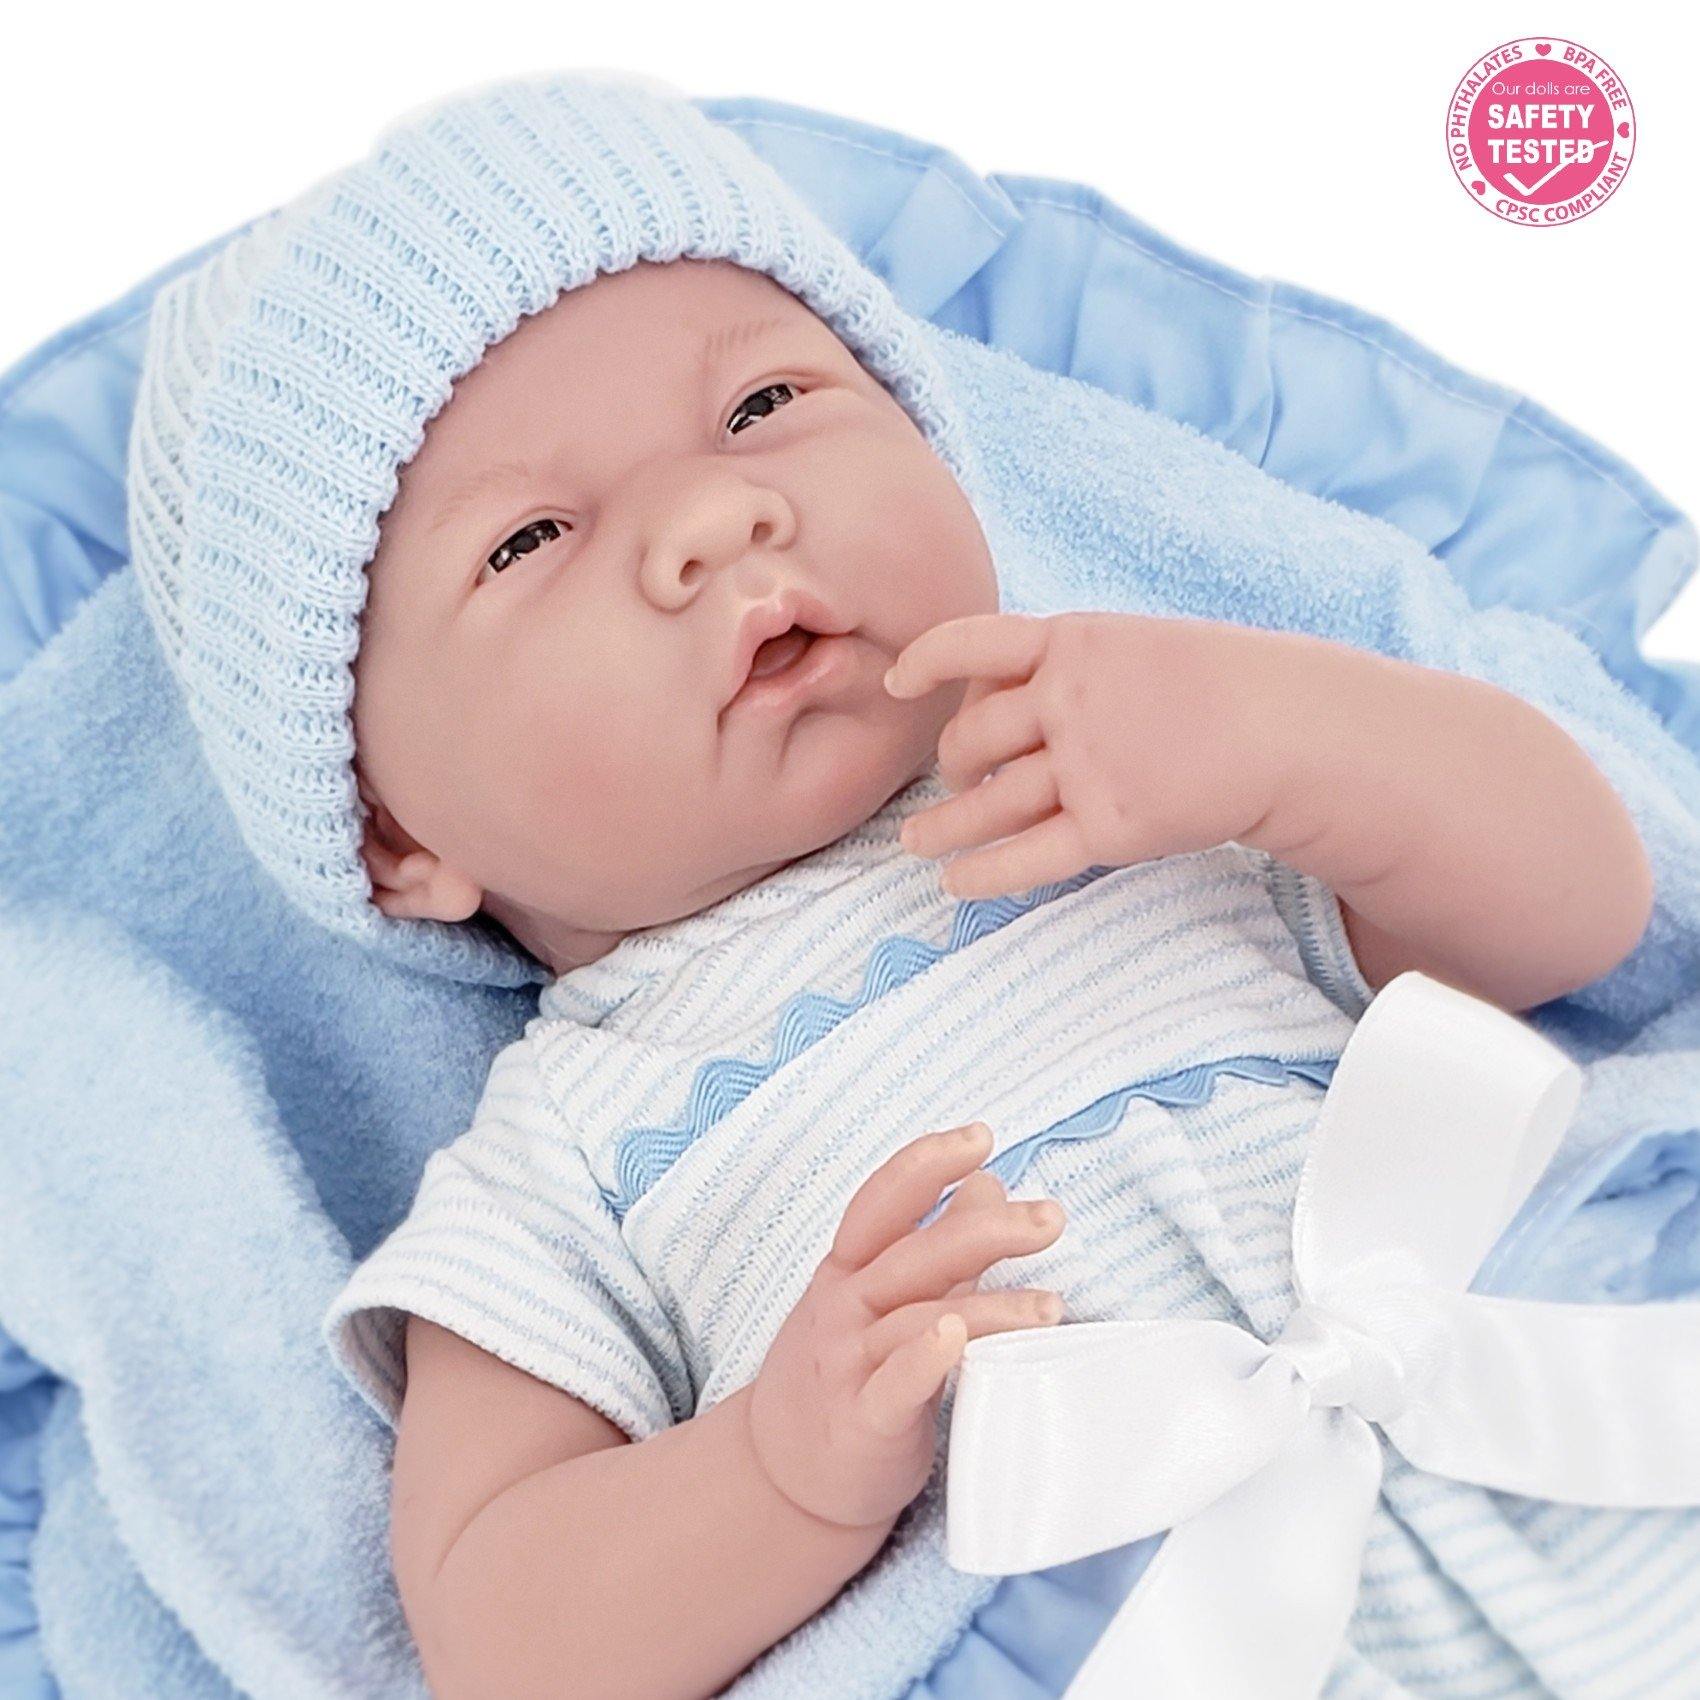 JC Toys, La Newborn Realistic Soft Body Baby Doll 15.5in - Blue outfit 7pcs Set - JC Toys Group Inc.